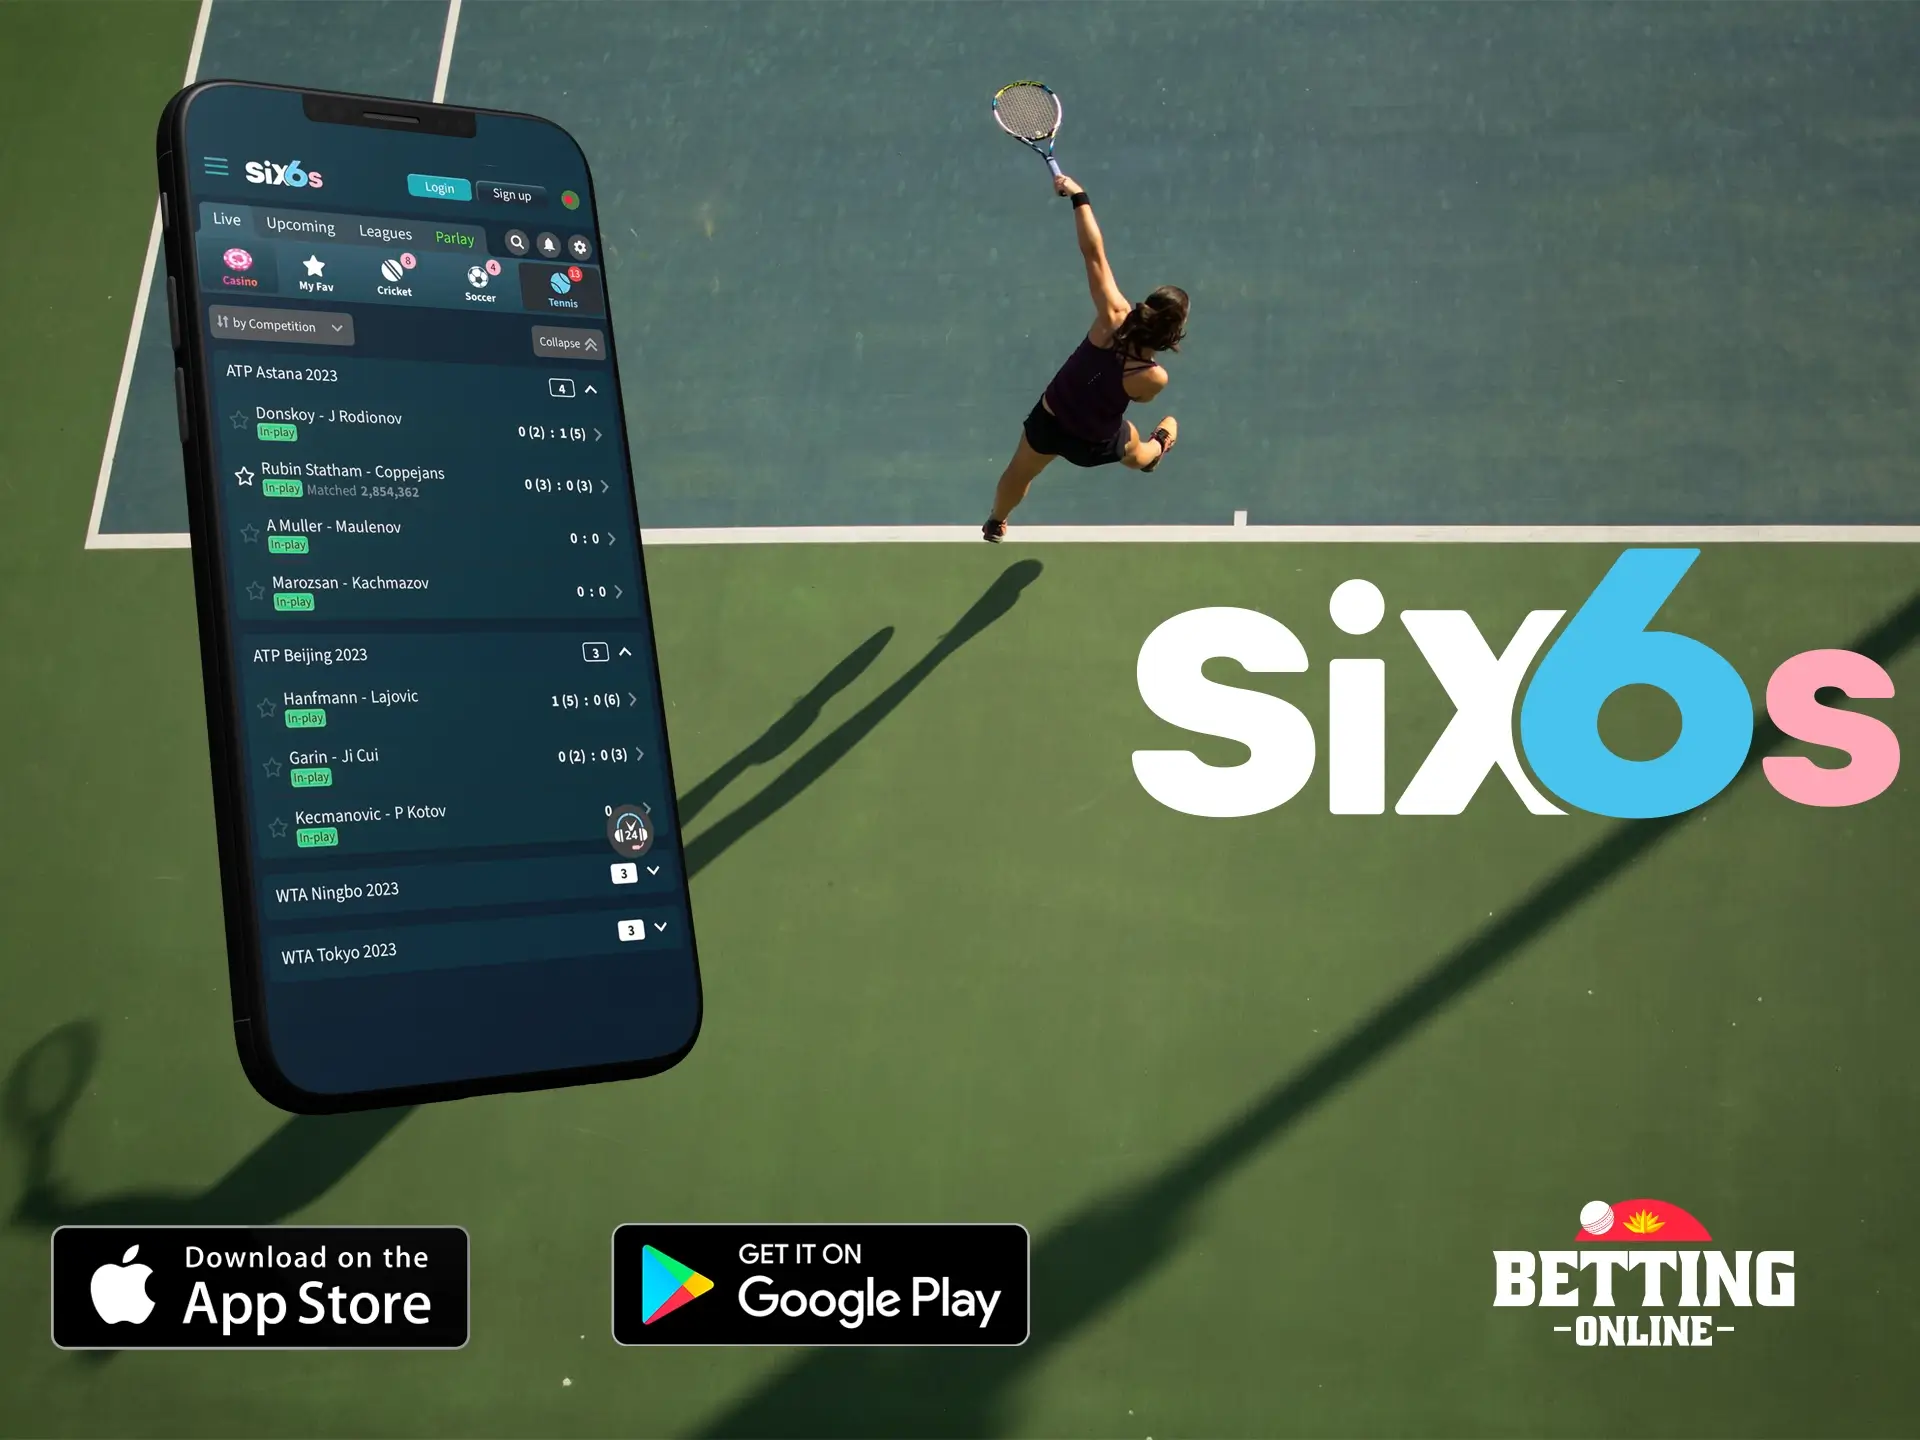 Six6s app is familiar to its users due to the sheer number of sports disciplines.